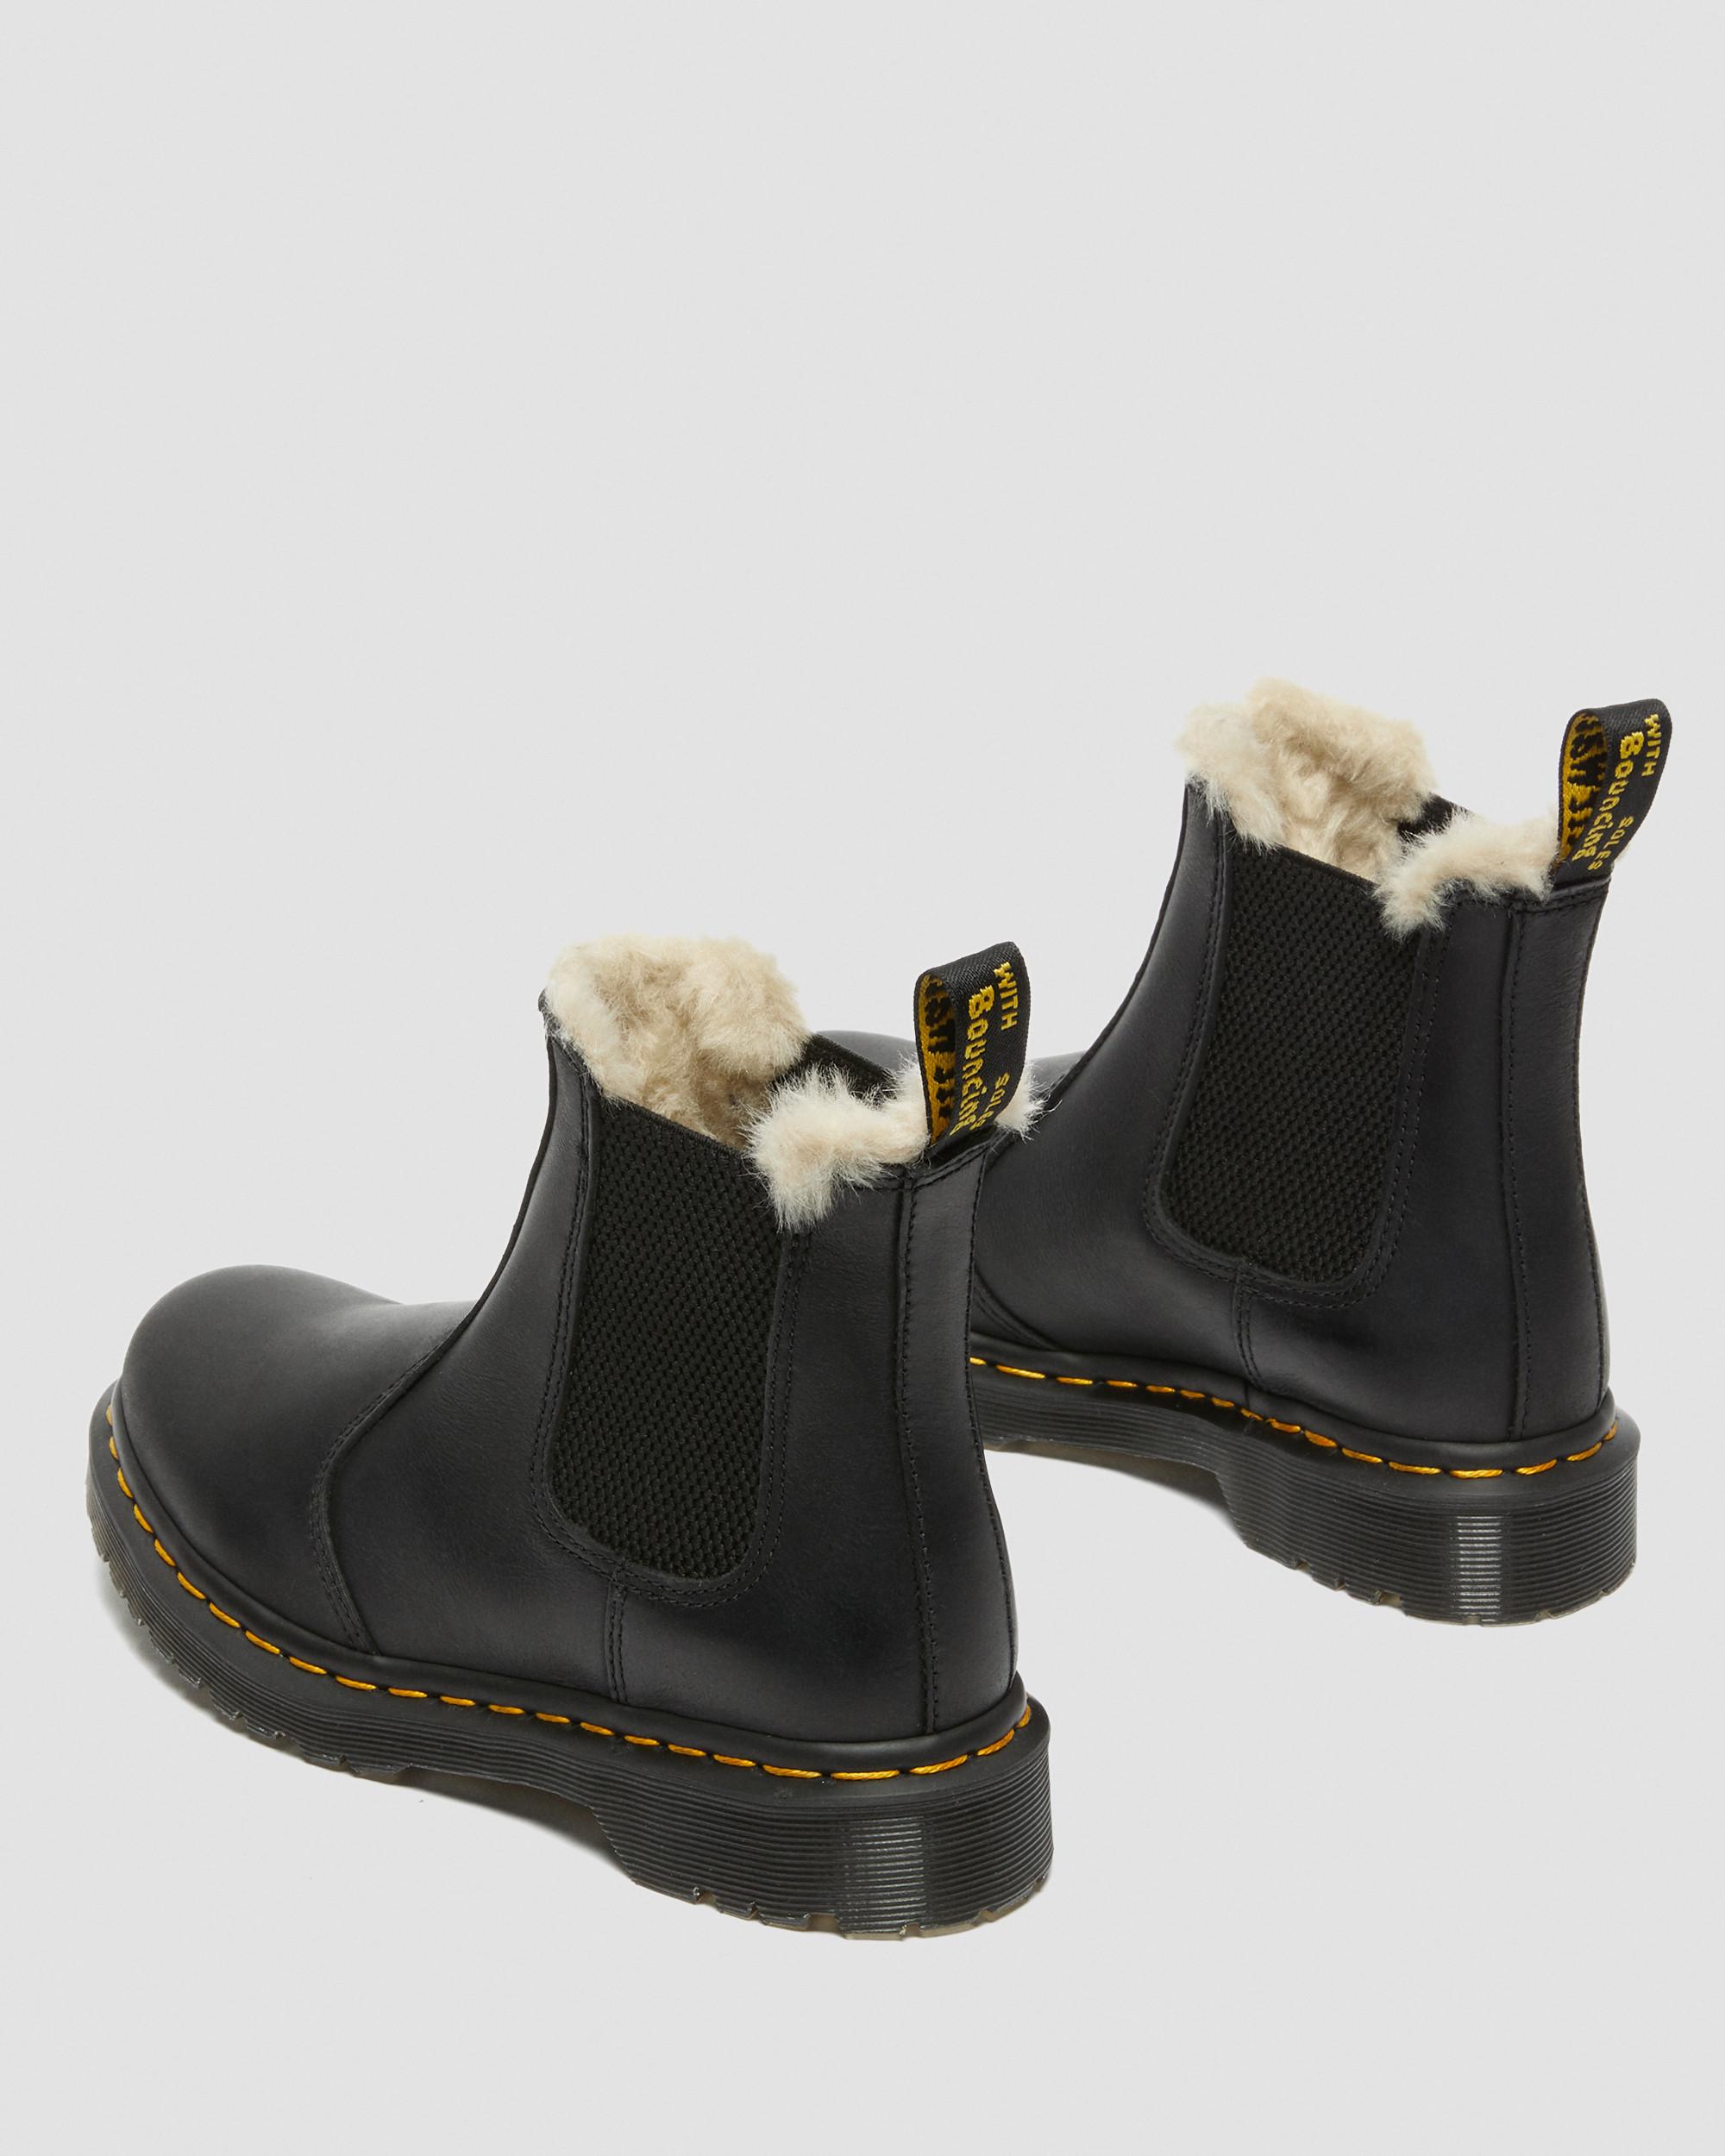 2976 Leonore Faux Fur Lined Burnished Chelsea Boots2976 Leonore Faux Fur Lined Burnished Chelsea Boots Dr. Martens